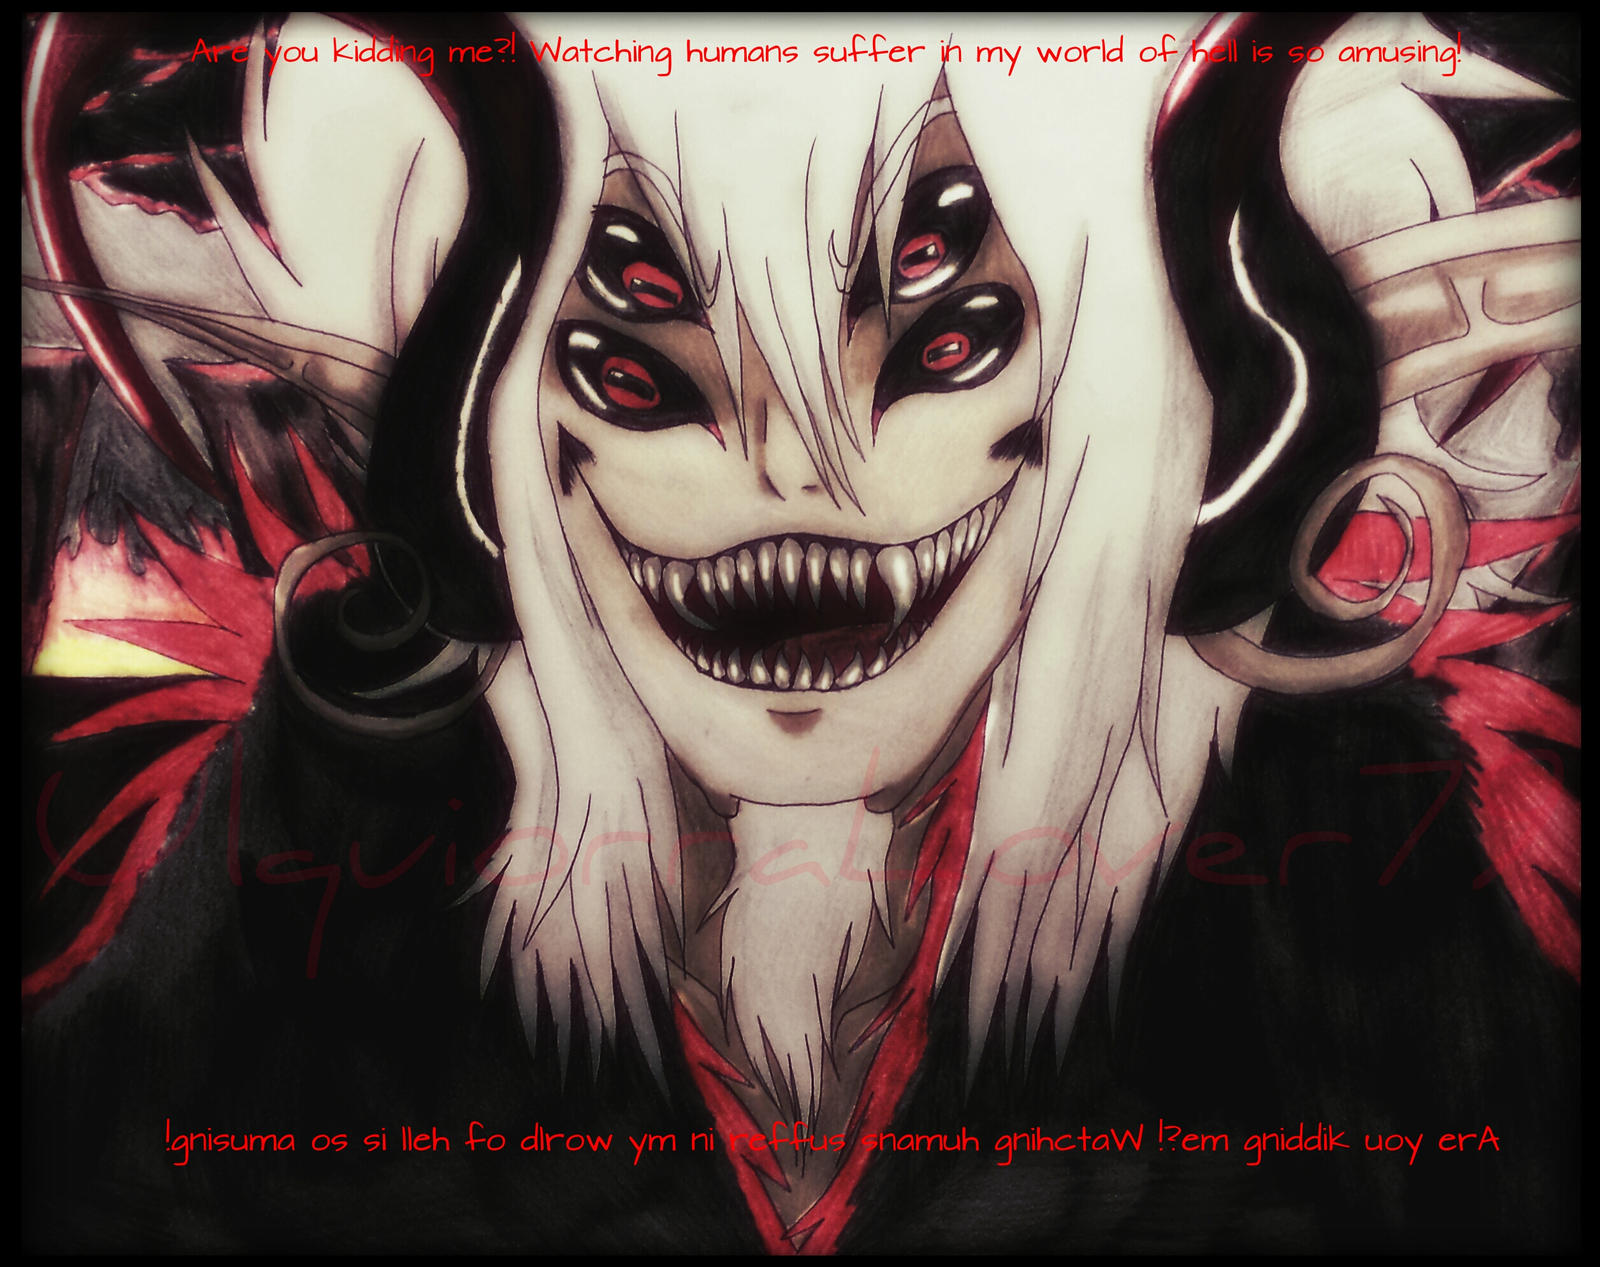 Lord Jigoku the goat God of Hell